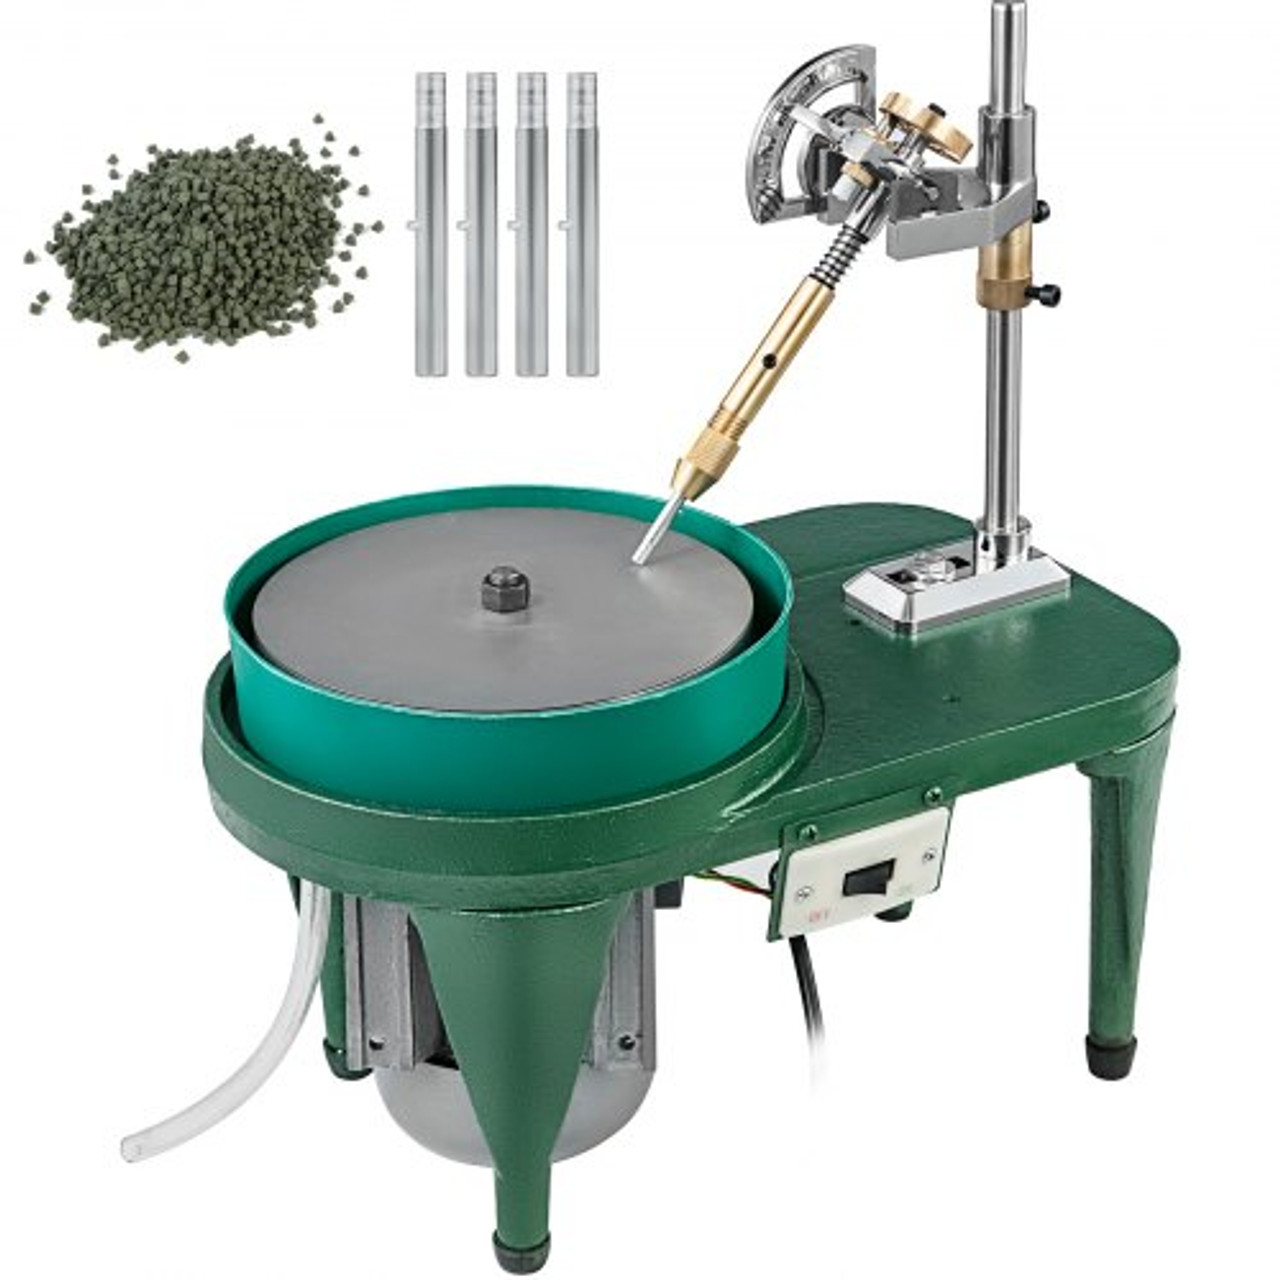 Gem Faceting Machine 180W Jade Grinding Polishing Machine 2800RPM Rock Polisher Jewel Angle Polisher 110V with Faceted Manipulator and 1 Bag of Triangle Abrasive for Jewelry Polisher